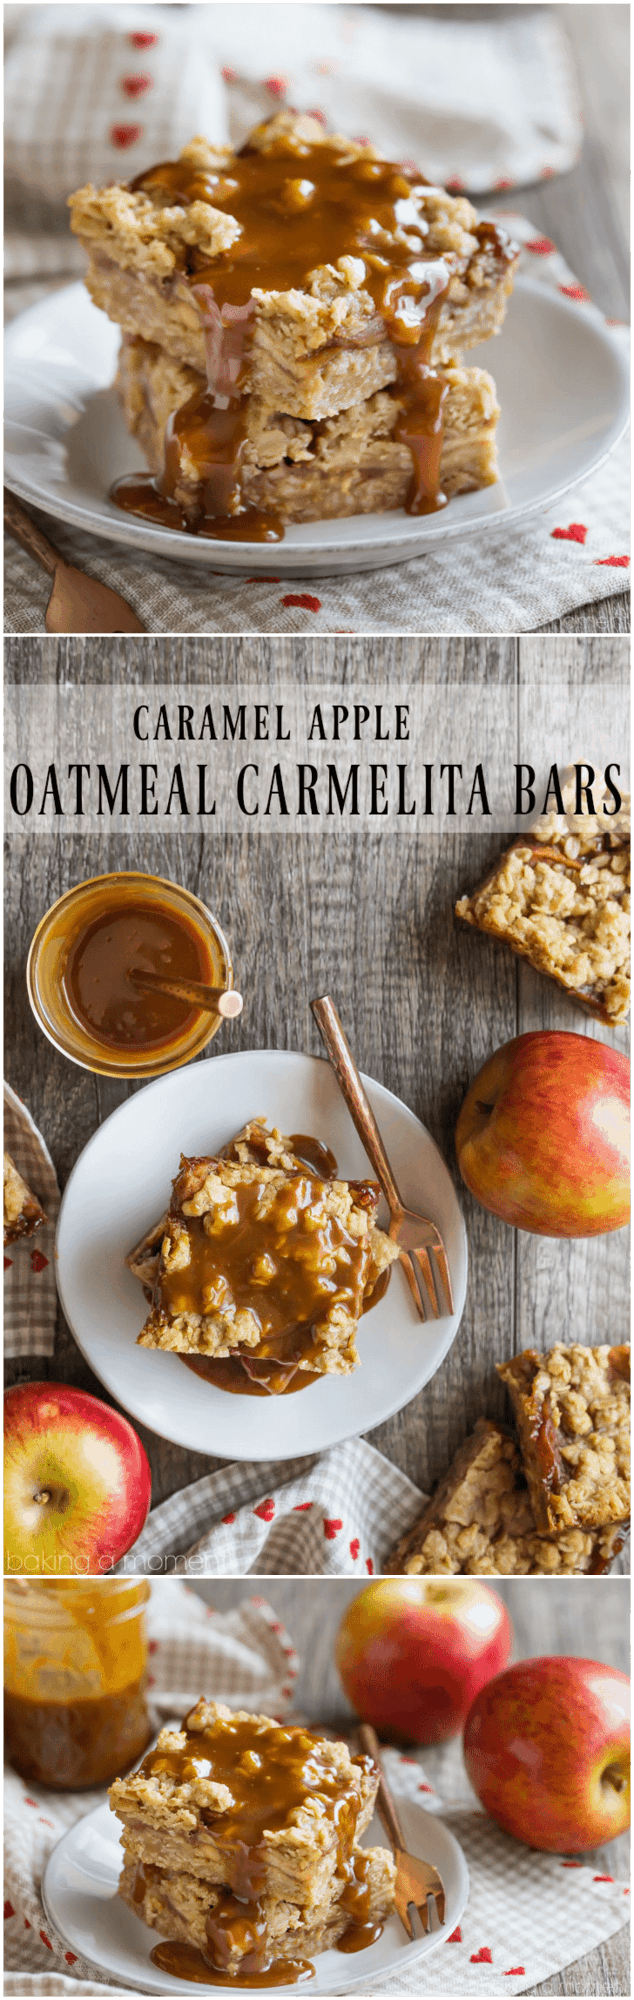 Caramel Apple Oatmeal Carmelita Bars- layers of chewy oatmeal cookie surround cinnamon-spiced apples and caramel sauce. A delicious fall treat! 